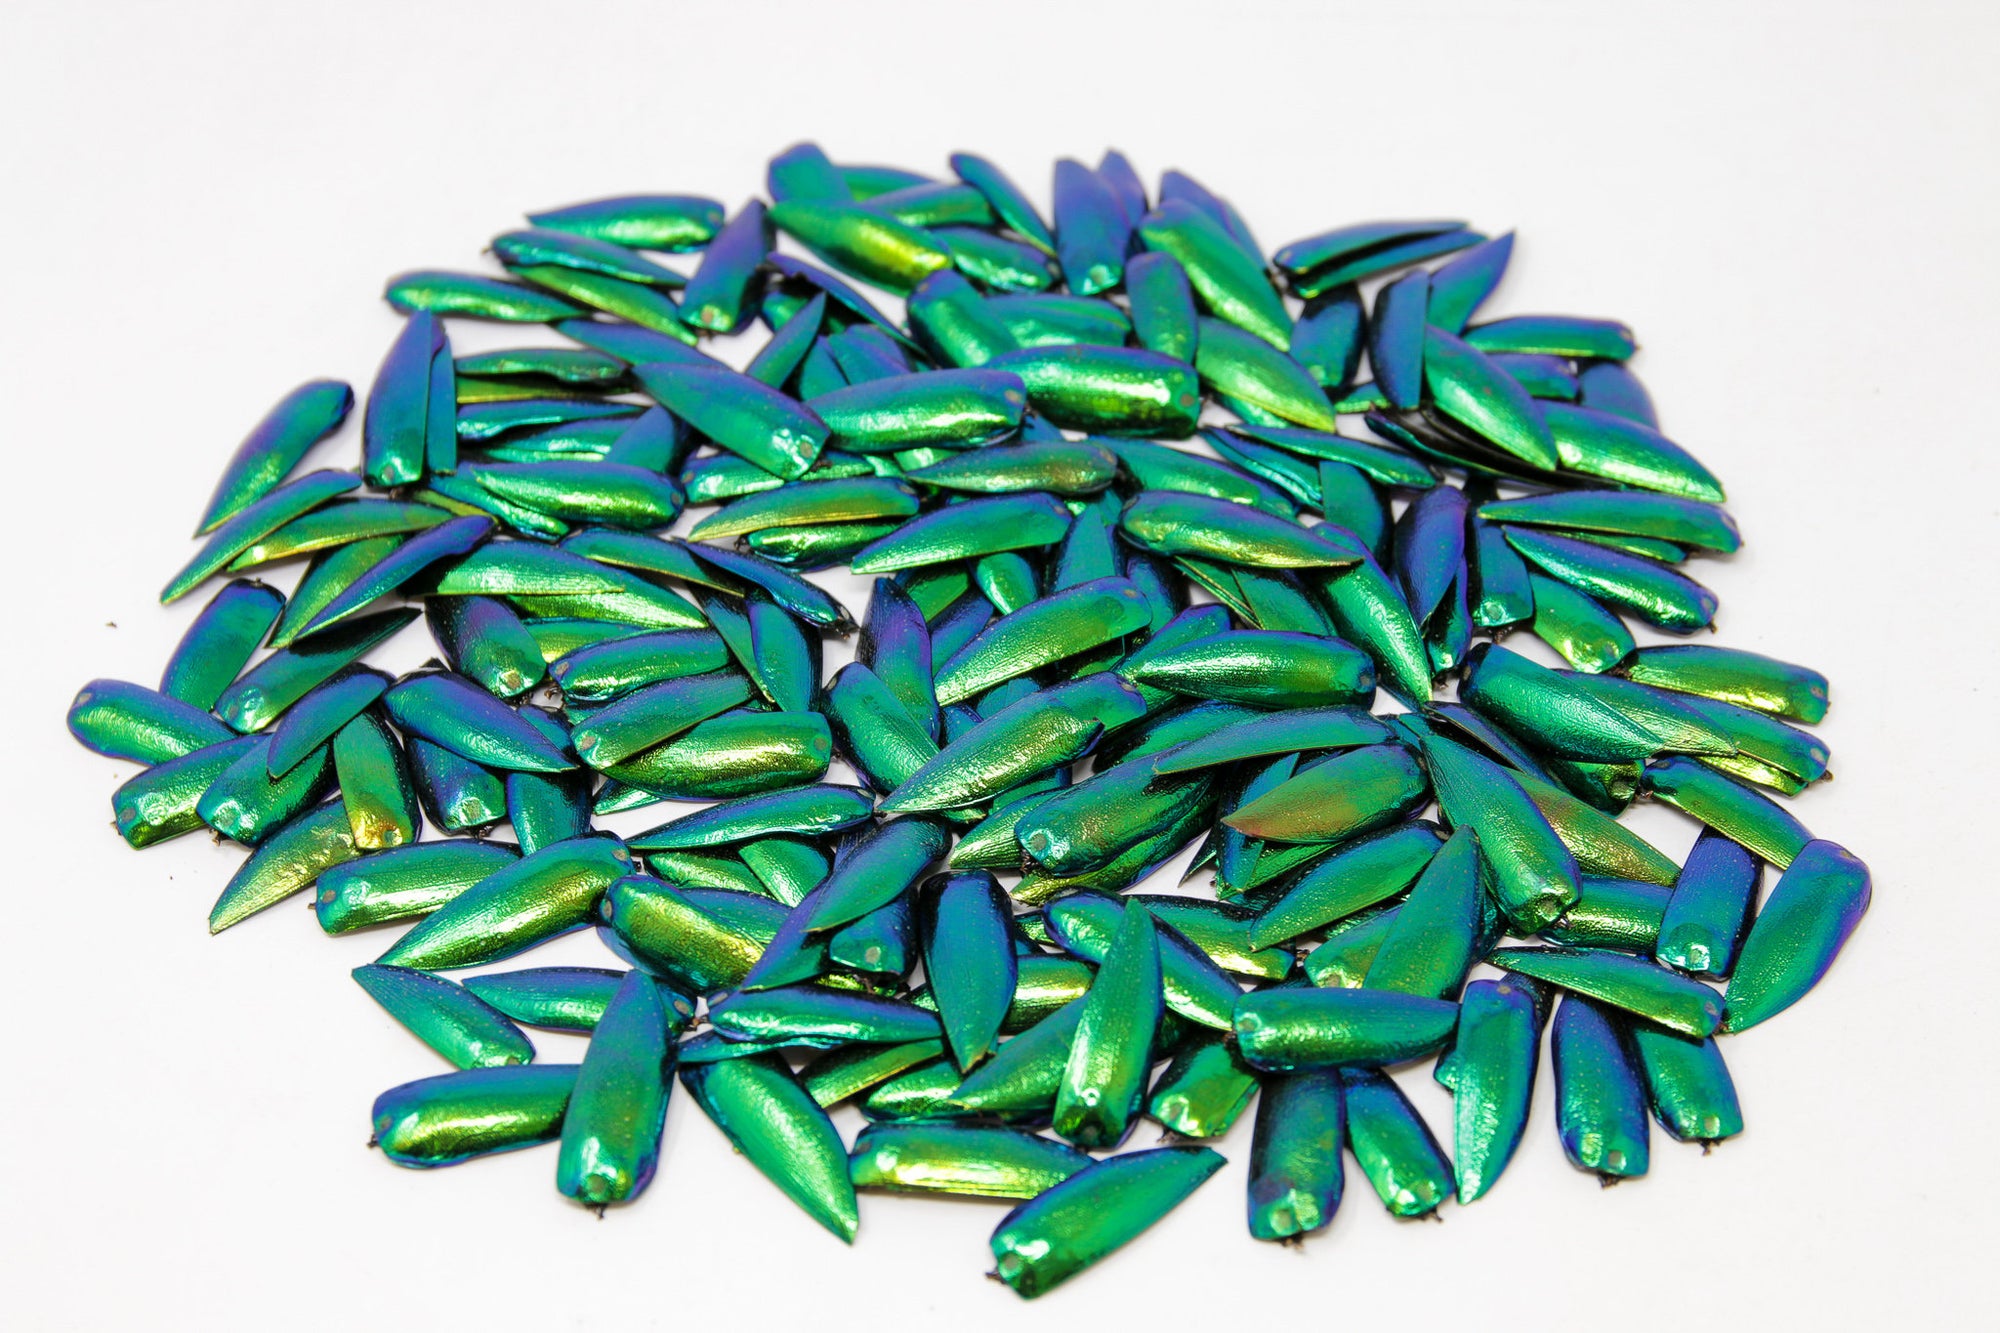 WHOLESALE 1KG (2.2LB) Jewel Beetle Wings Elytra |  Sternocera aequisignata | Ethically Sourced